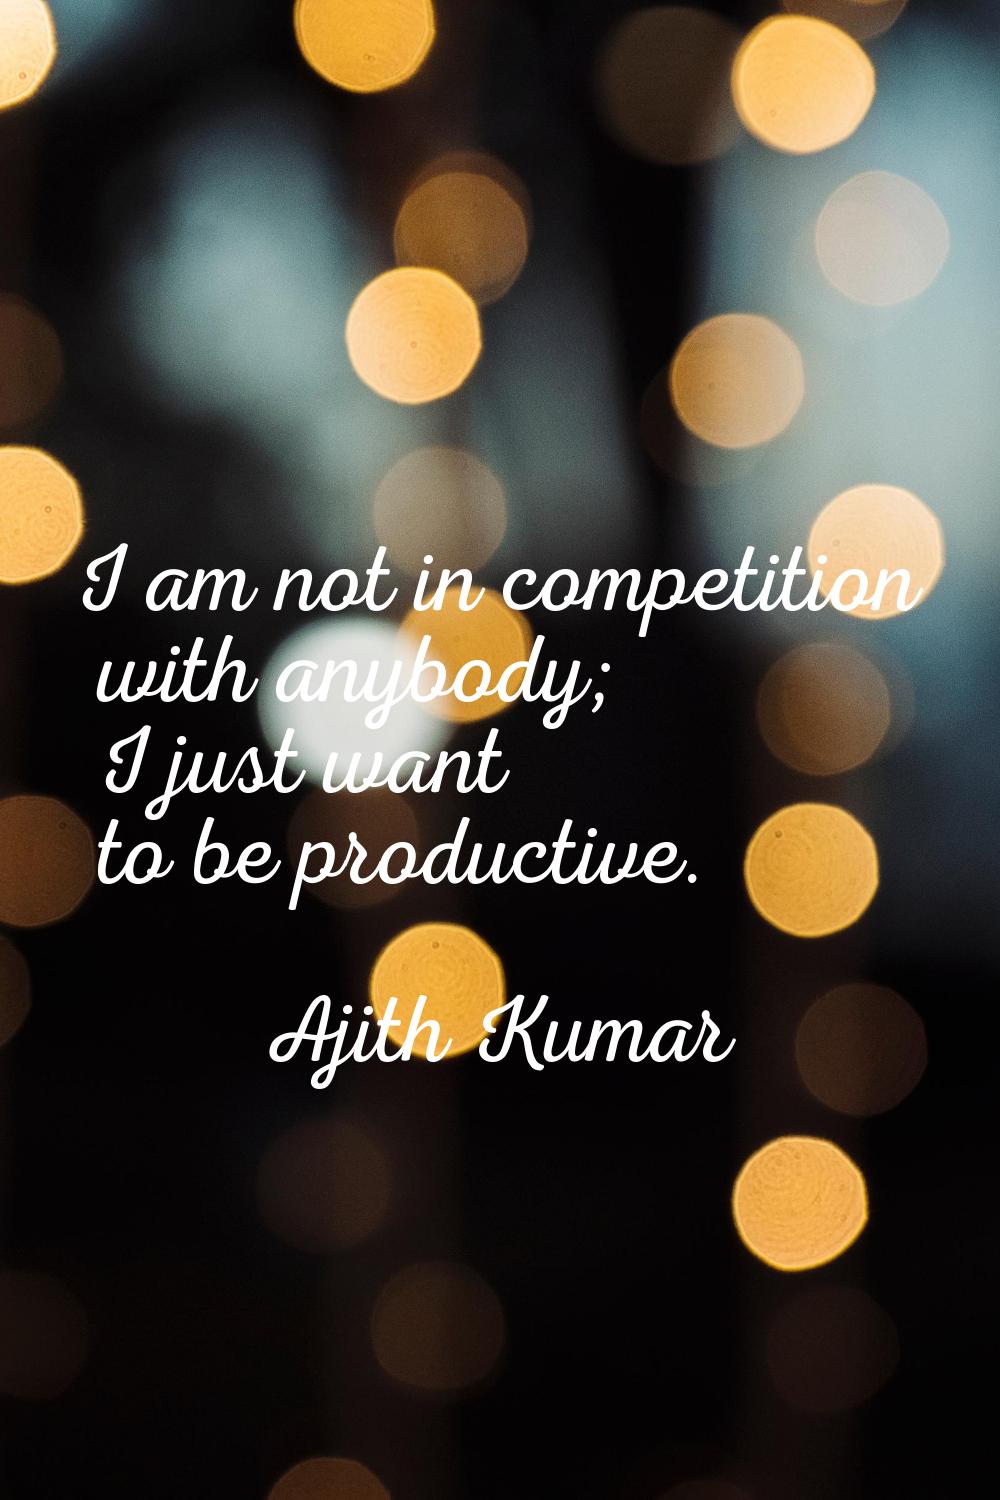 I am not in competition with anybody; I just want to be productive.